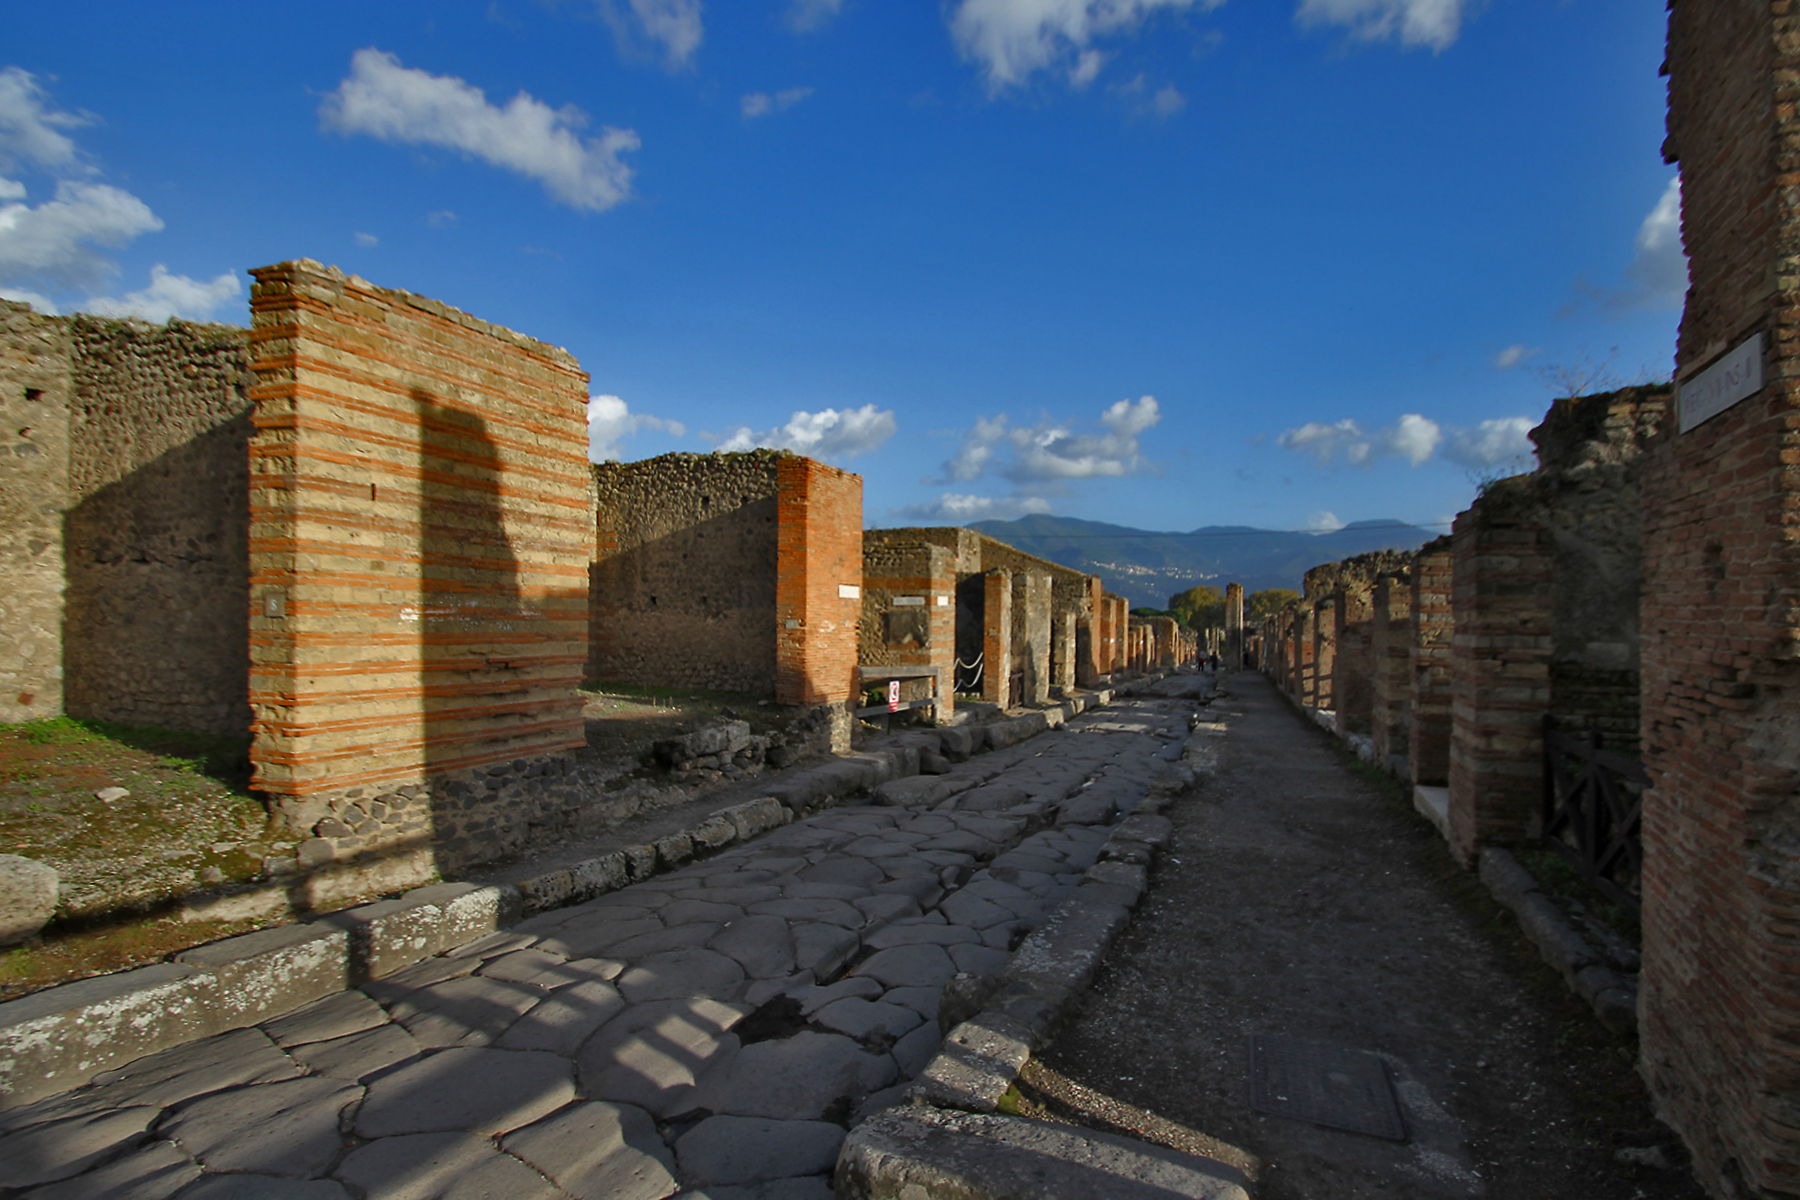 Street view of the historical site of Pompei